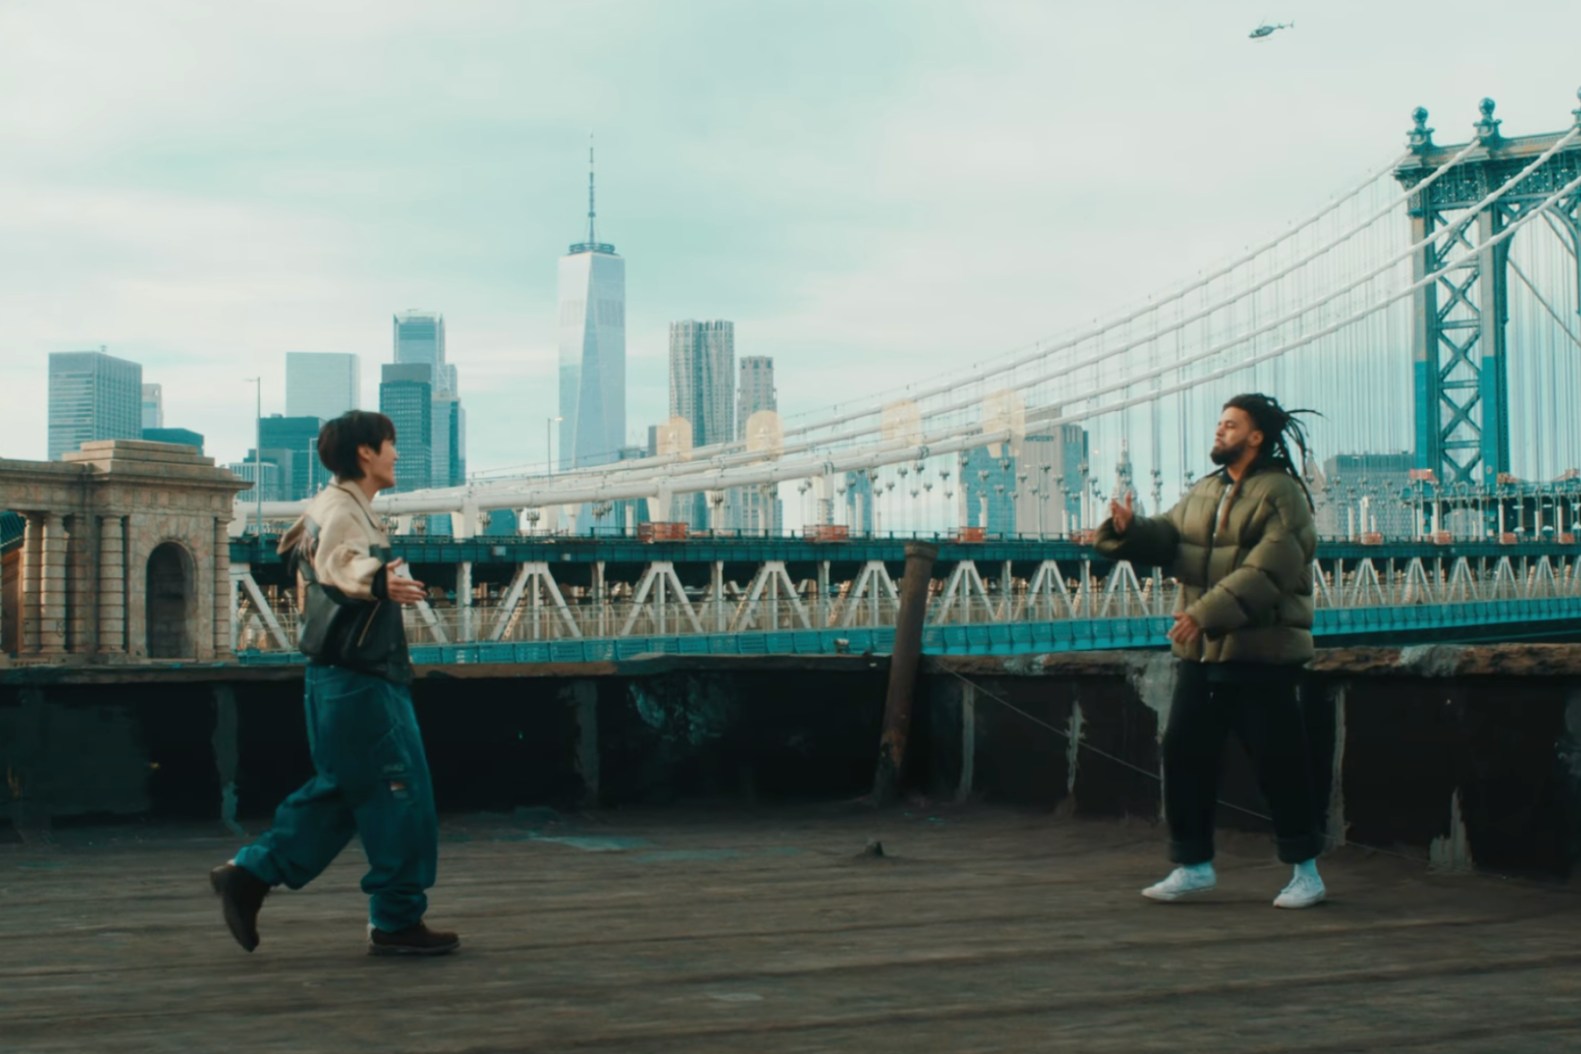 Music Video Where They Dance Their Way Through NYC